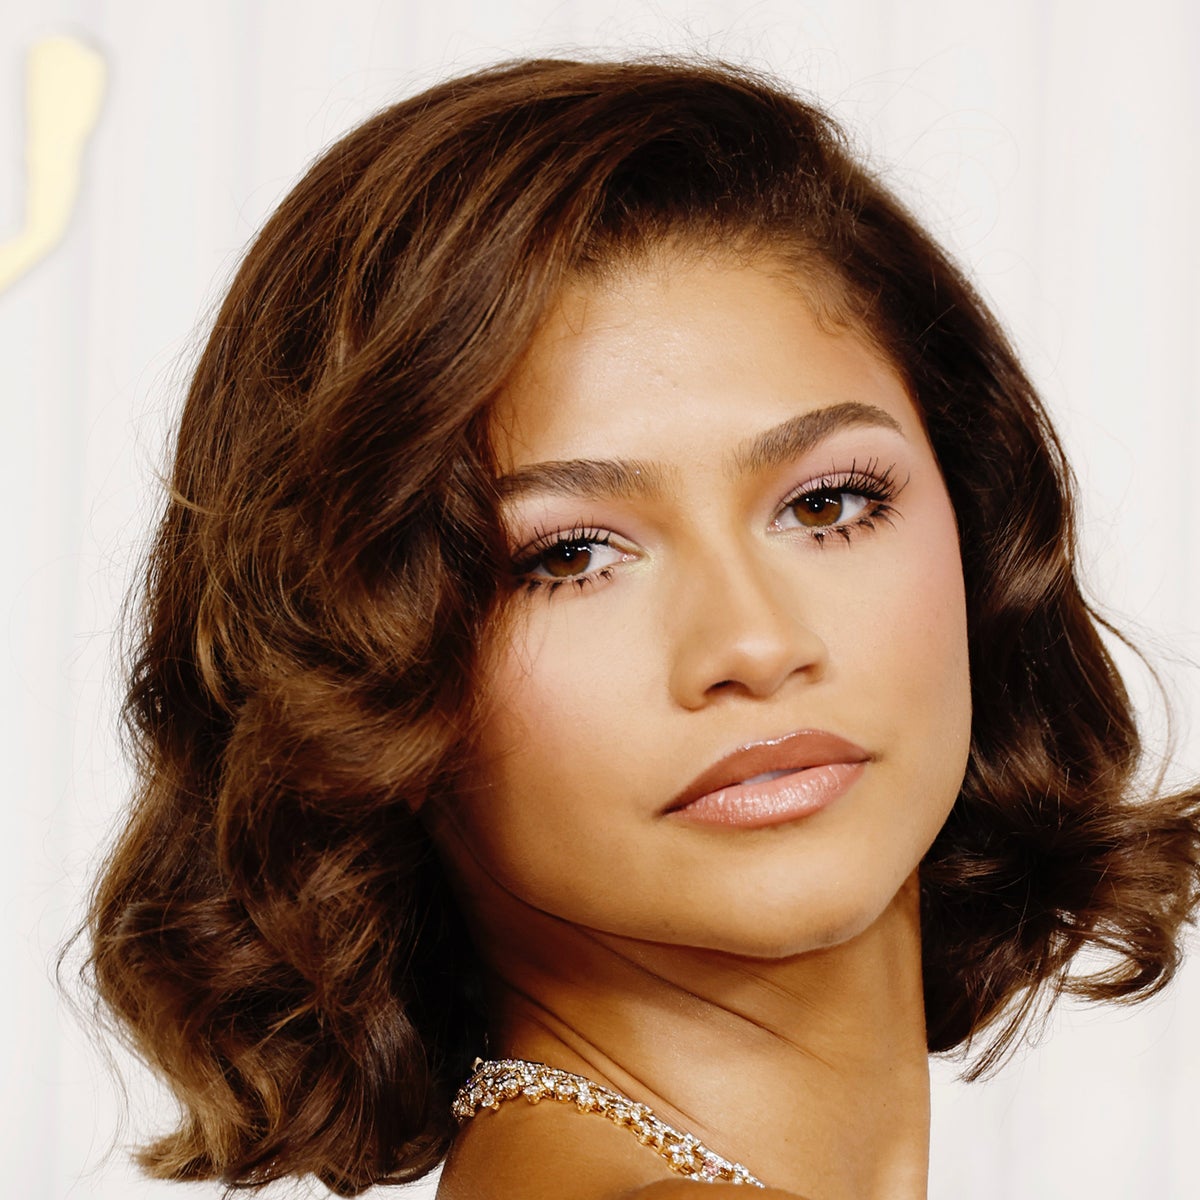 Zendaya Made Her Louis Vuitton Campaign Debut in a Sexy Take on the Classic  LBD